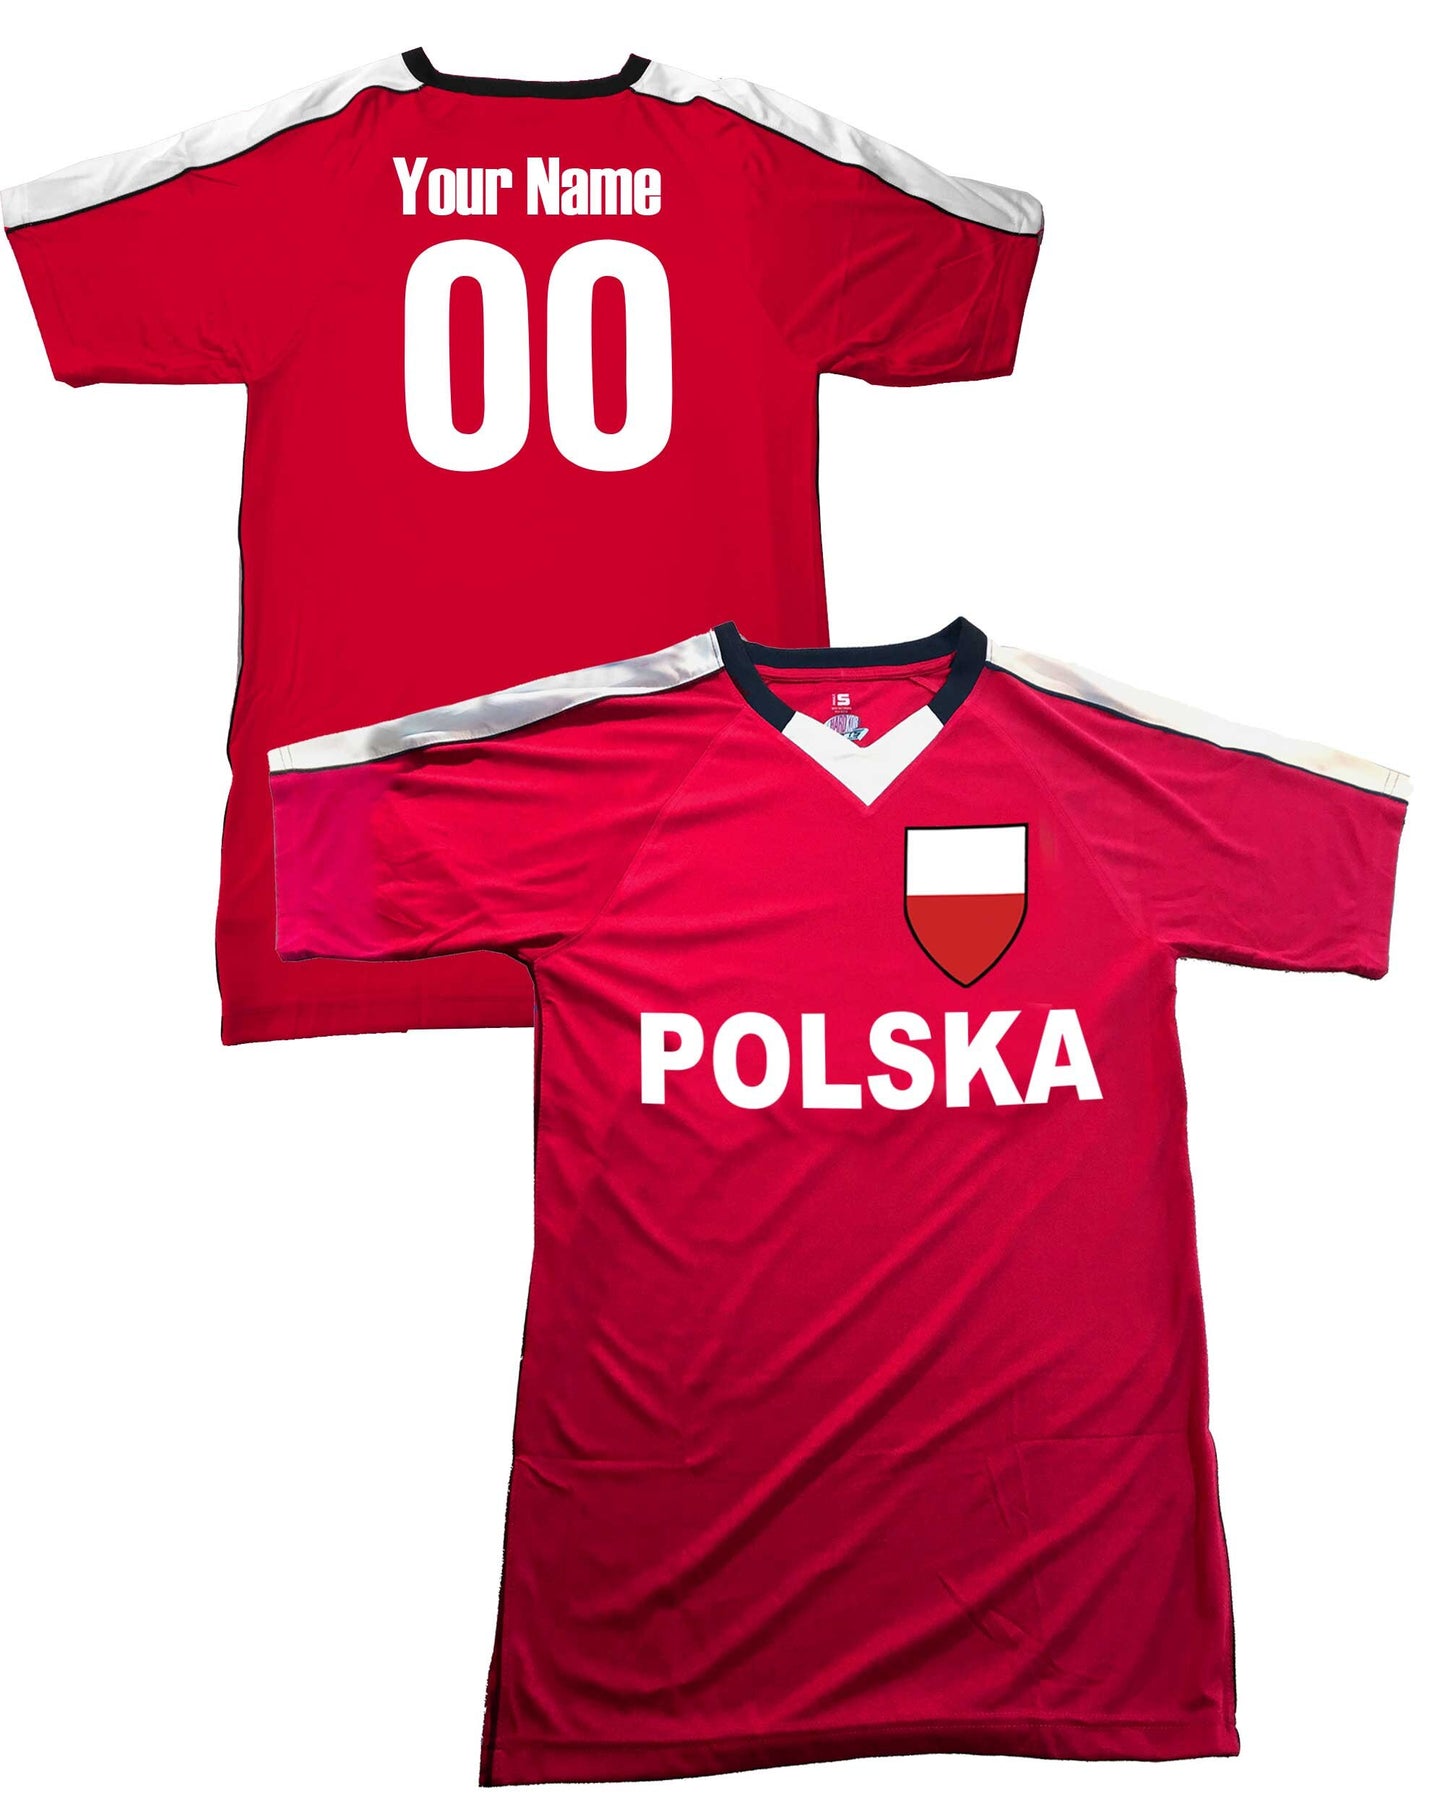 Polska Soccer Jersey Poland Country Name Written in Polish, Personalized with your Player name and Number on back